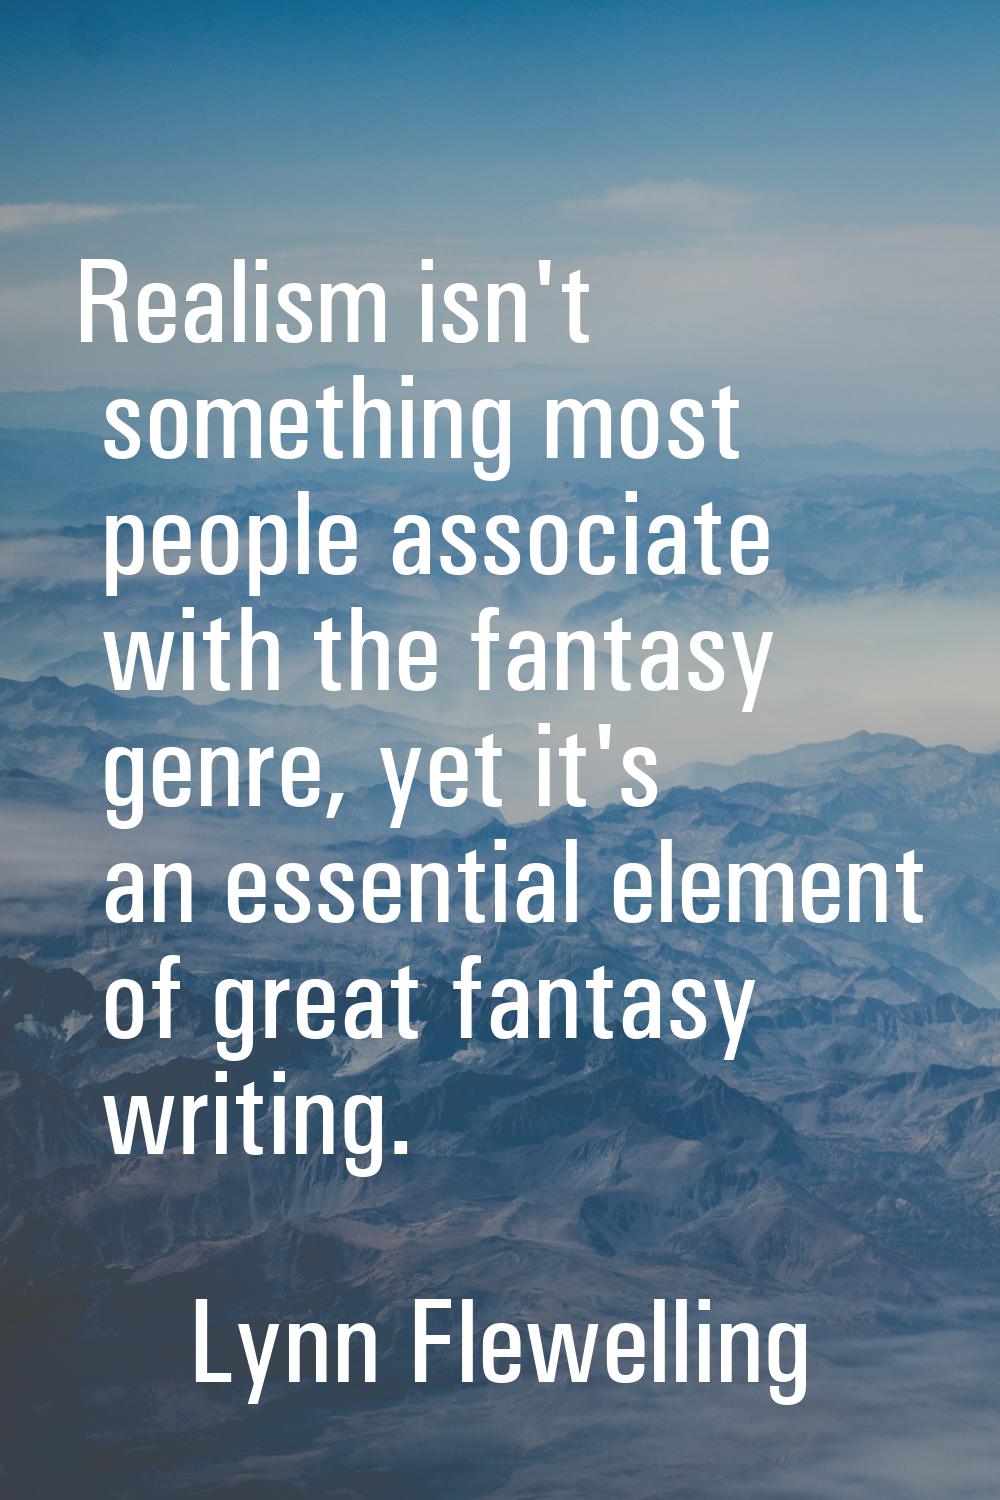 Realism isn't something most people associate with the fantasy genre, yet it's an essential element